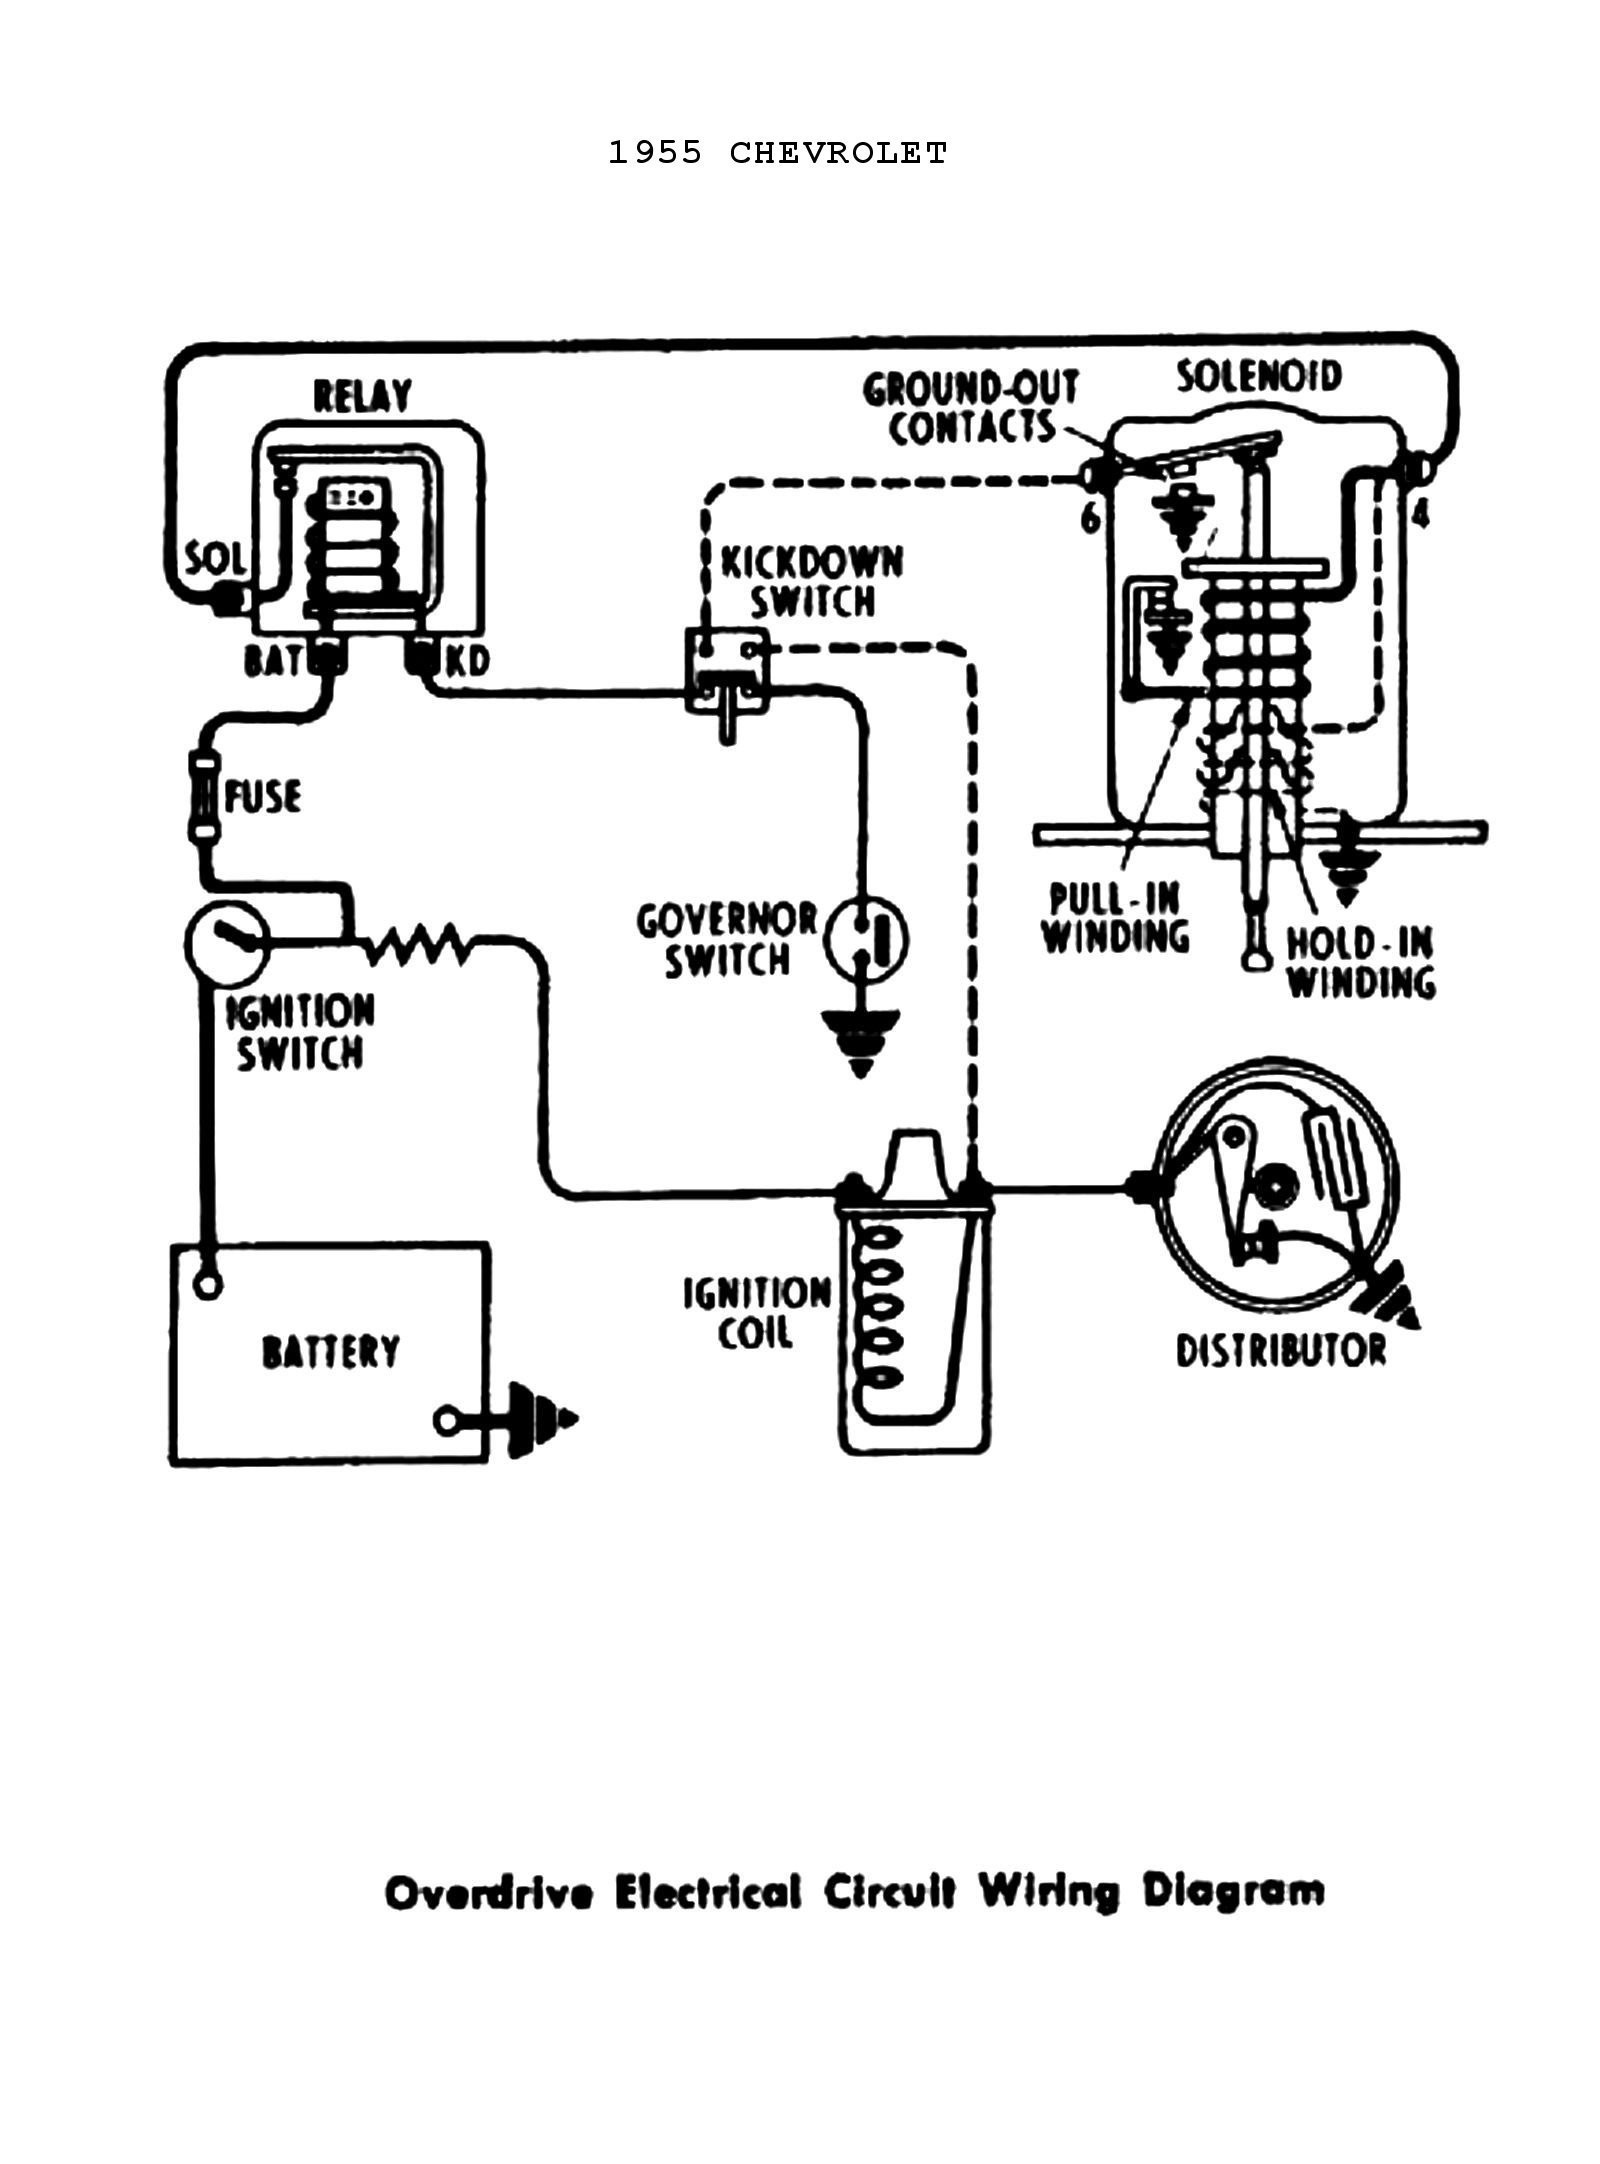 Wiring Diagram for Distributor Refrence Chevy Ignition Coil Wiring Diagram Collection – Wiring Diagram